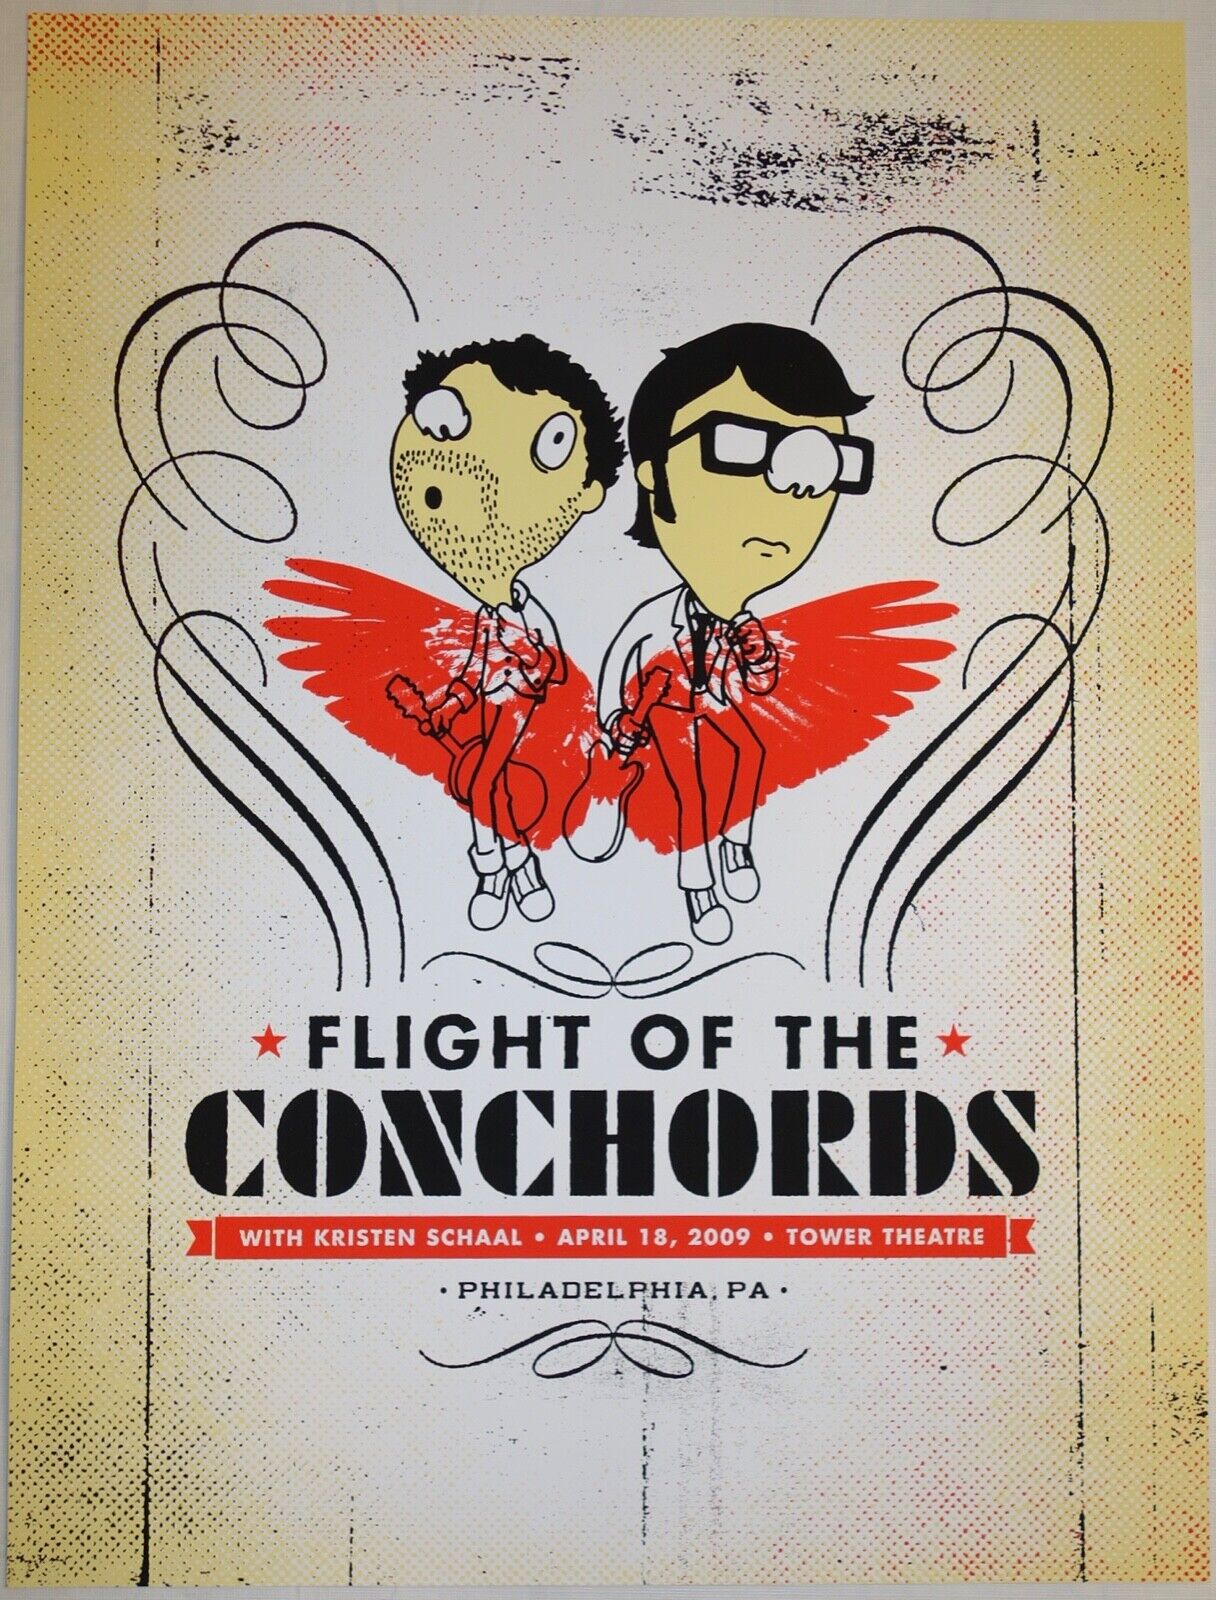 2009 Flight Of The Conchords  Upper Darby Concert Poster By Aesthetic Apparatus